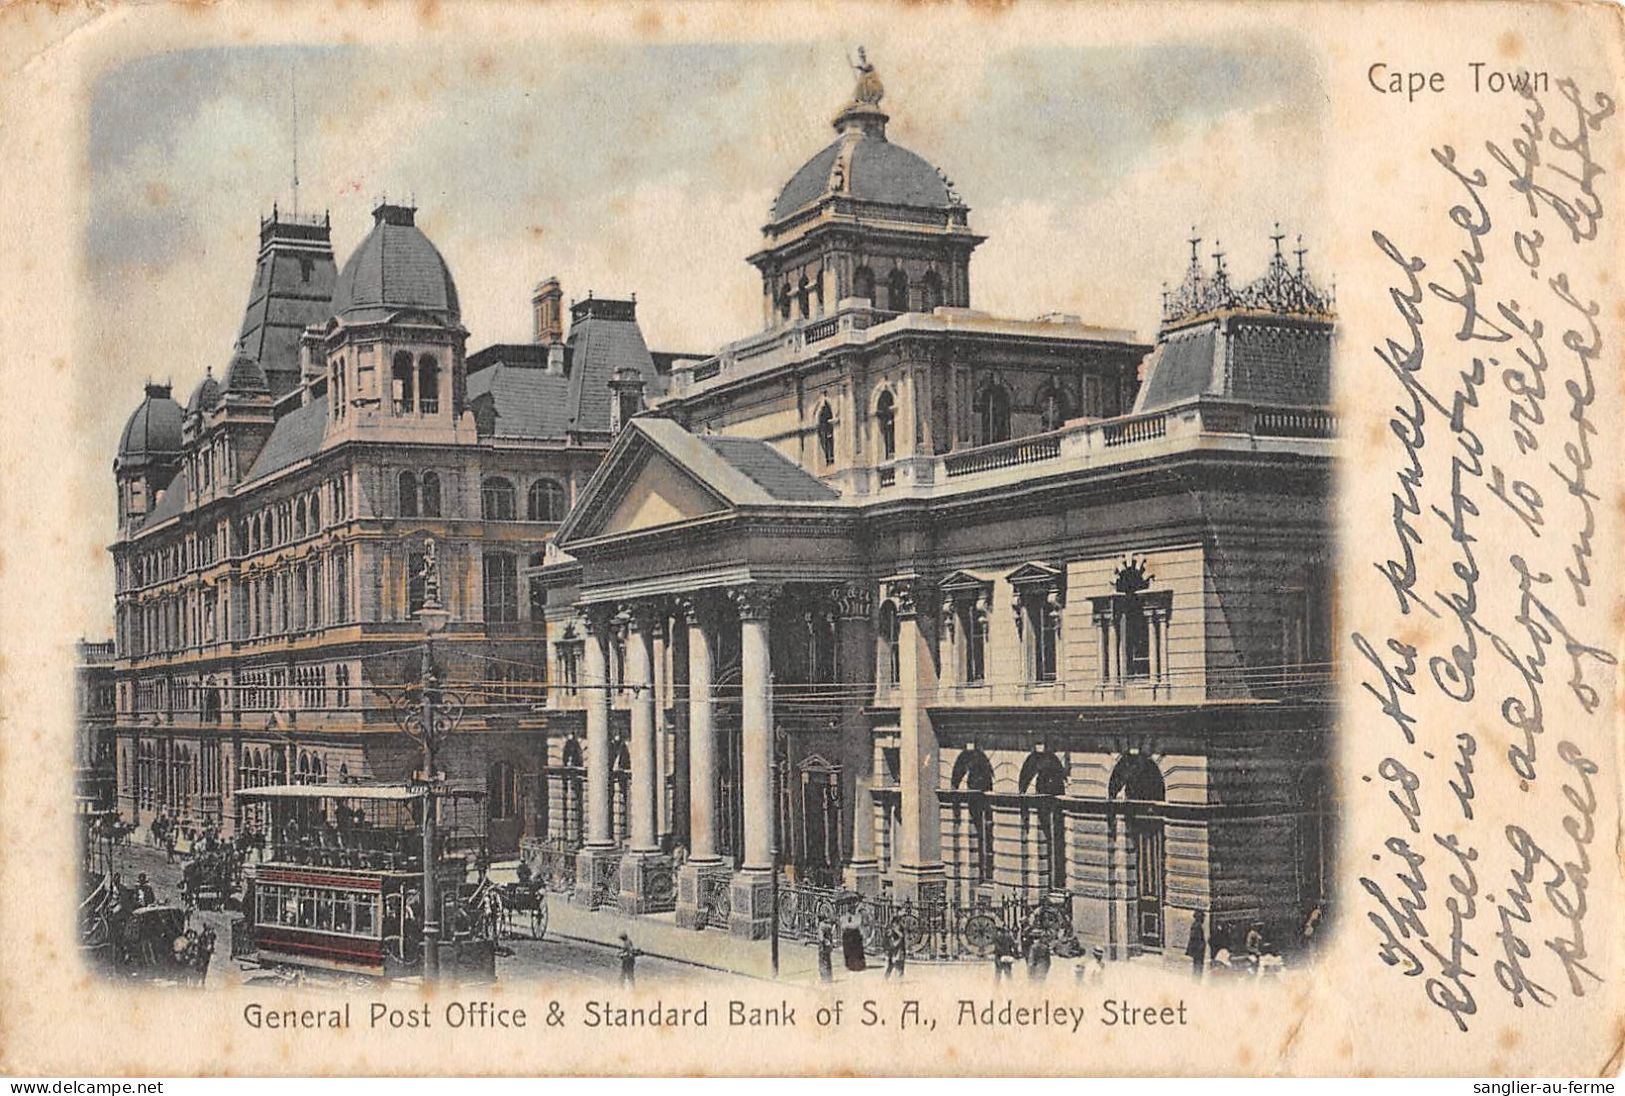 CPA / AFRIQUE DU SUD / GENERAL POST OFFICE AND STANDARS BANK OF S.A. / ADDERLEY STREET / CAPE TOWN - Afrique Du Sud